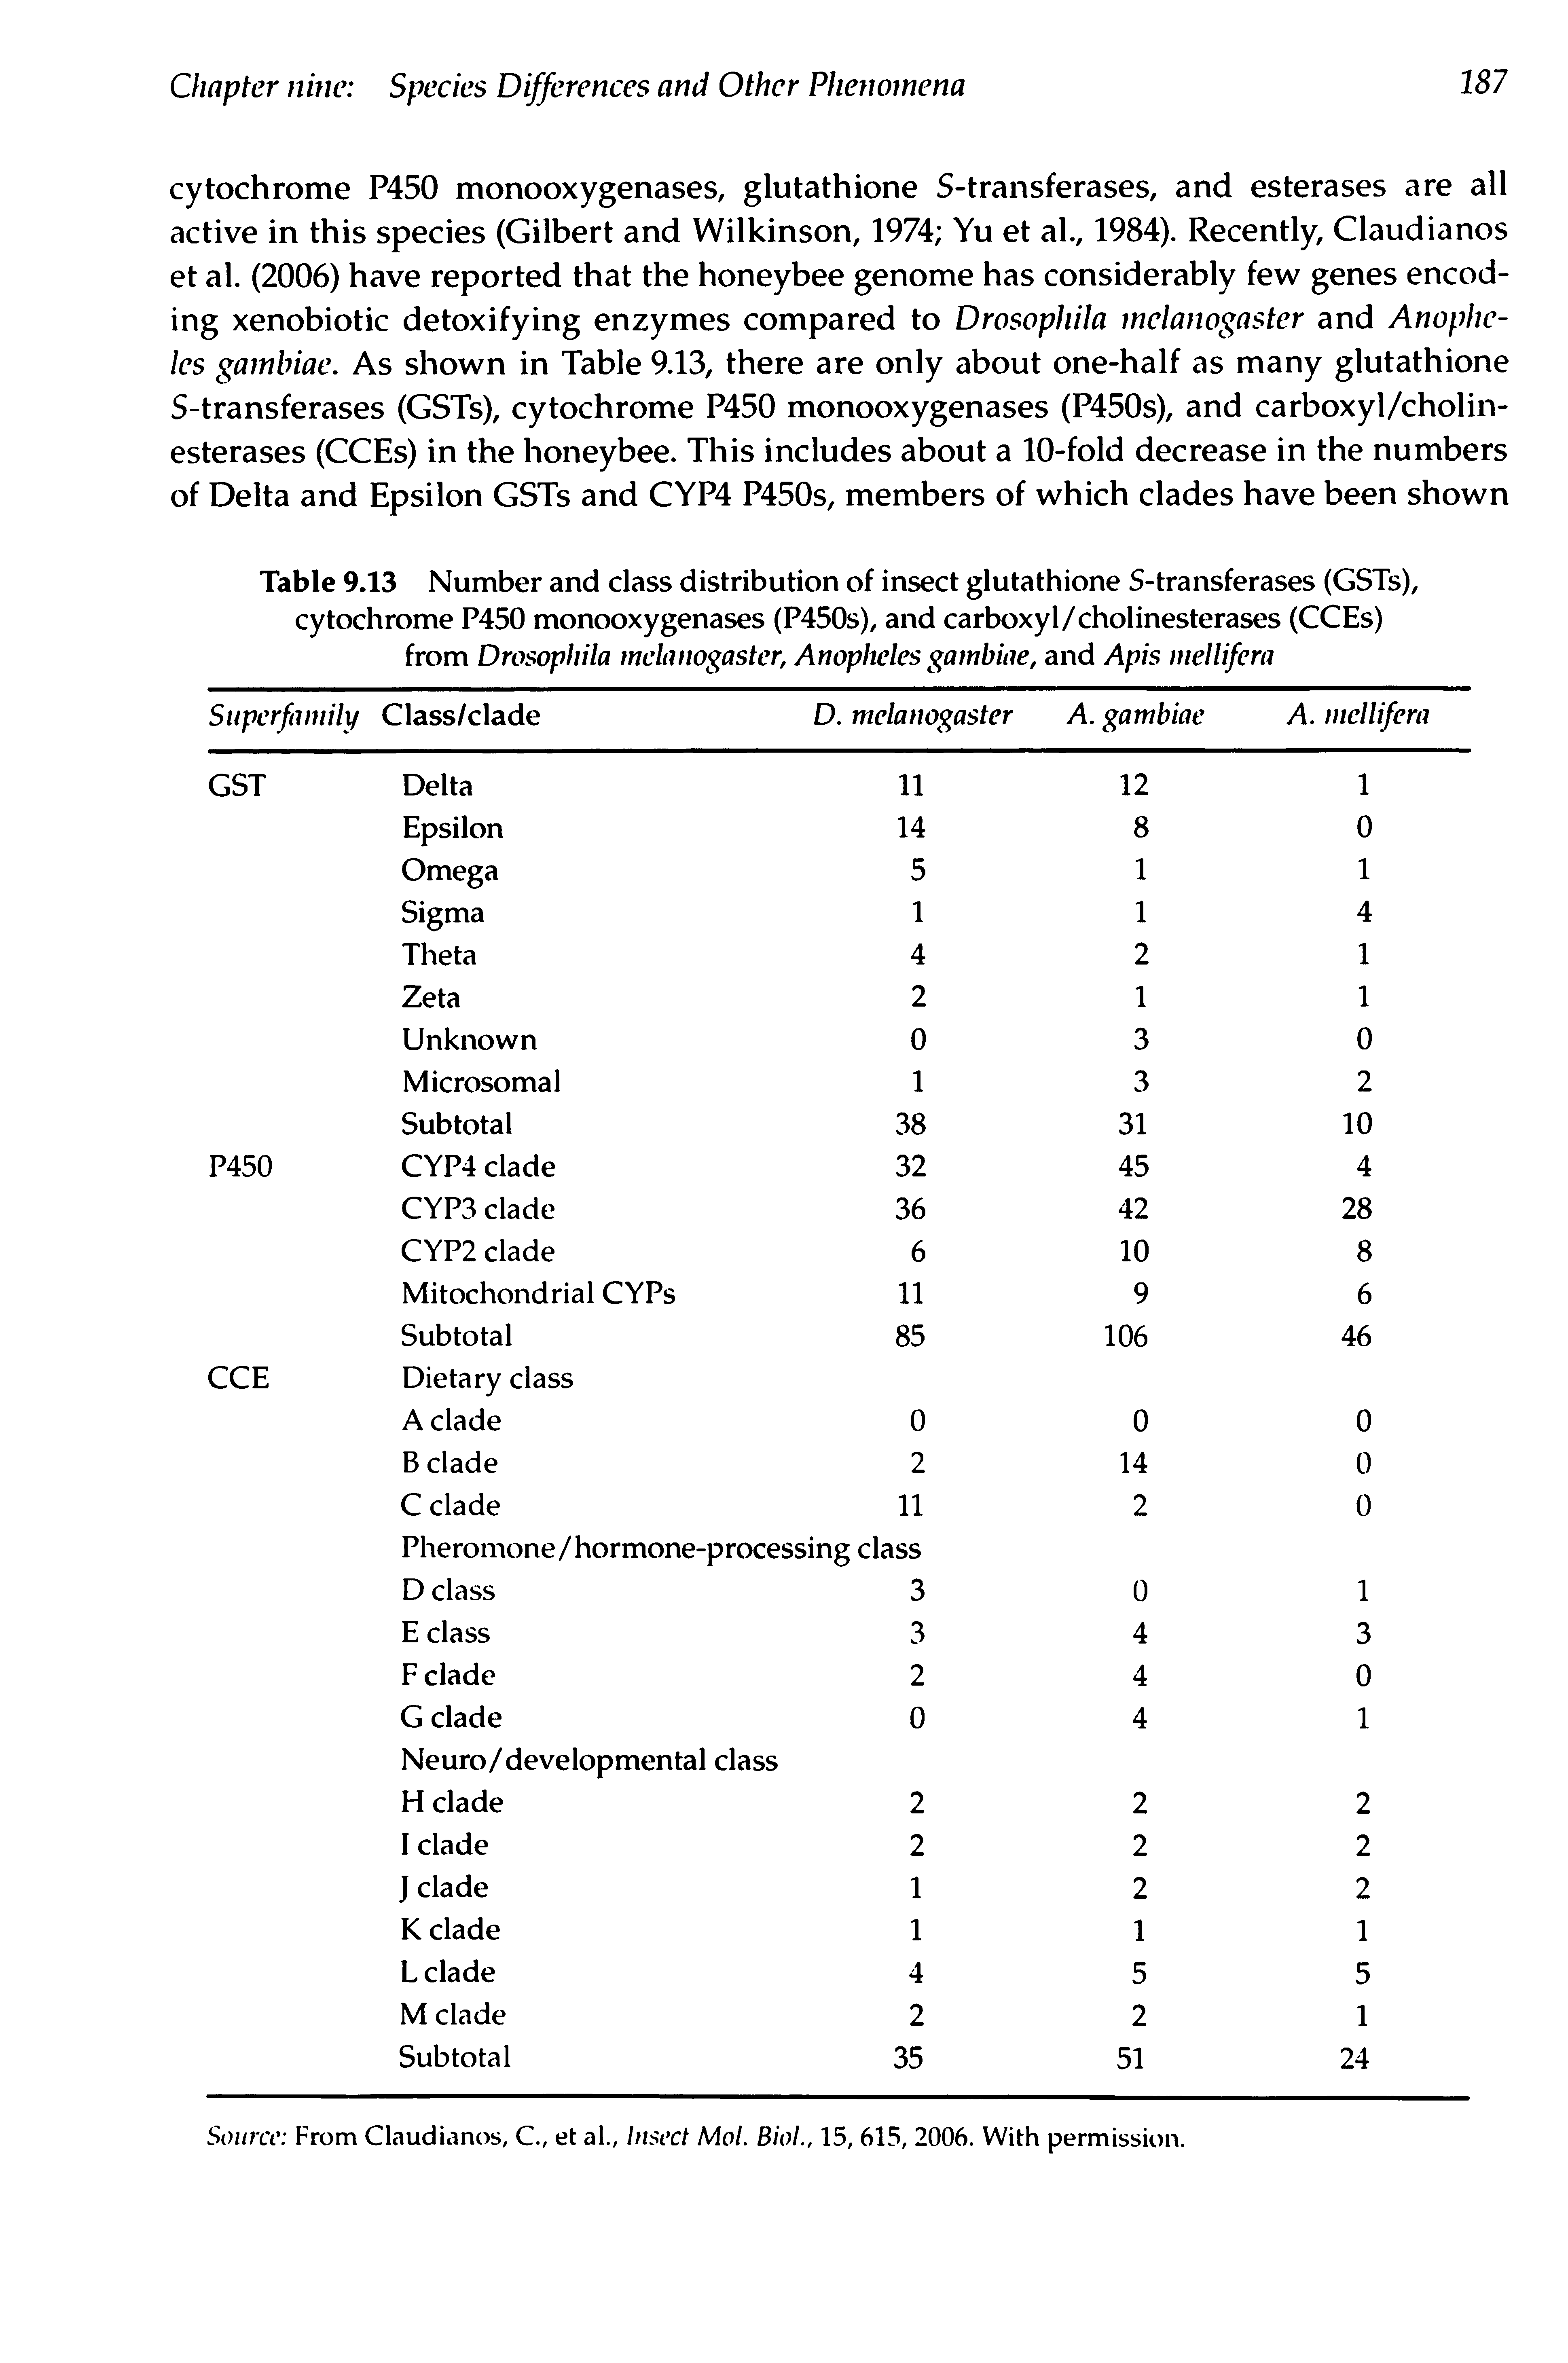 Table 9.13 Number and class distribution of insect glutathione S-transferases (GSTs), cytochrome P450 monooxygenases (P450s), and carboxyl/cholinesterases (CCEs) from Drosophila melanogaster, Anopheles gambiae, and Apis mellifera...